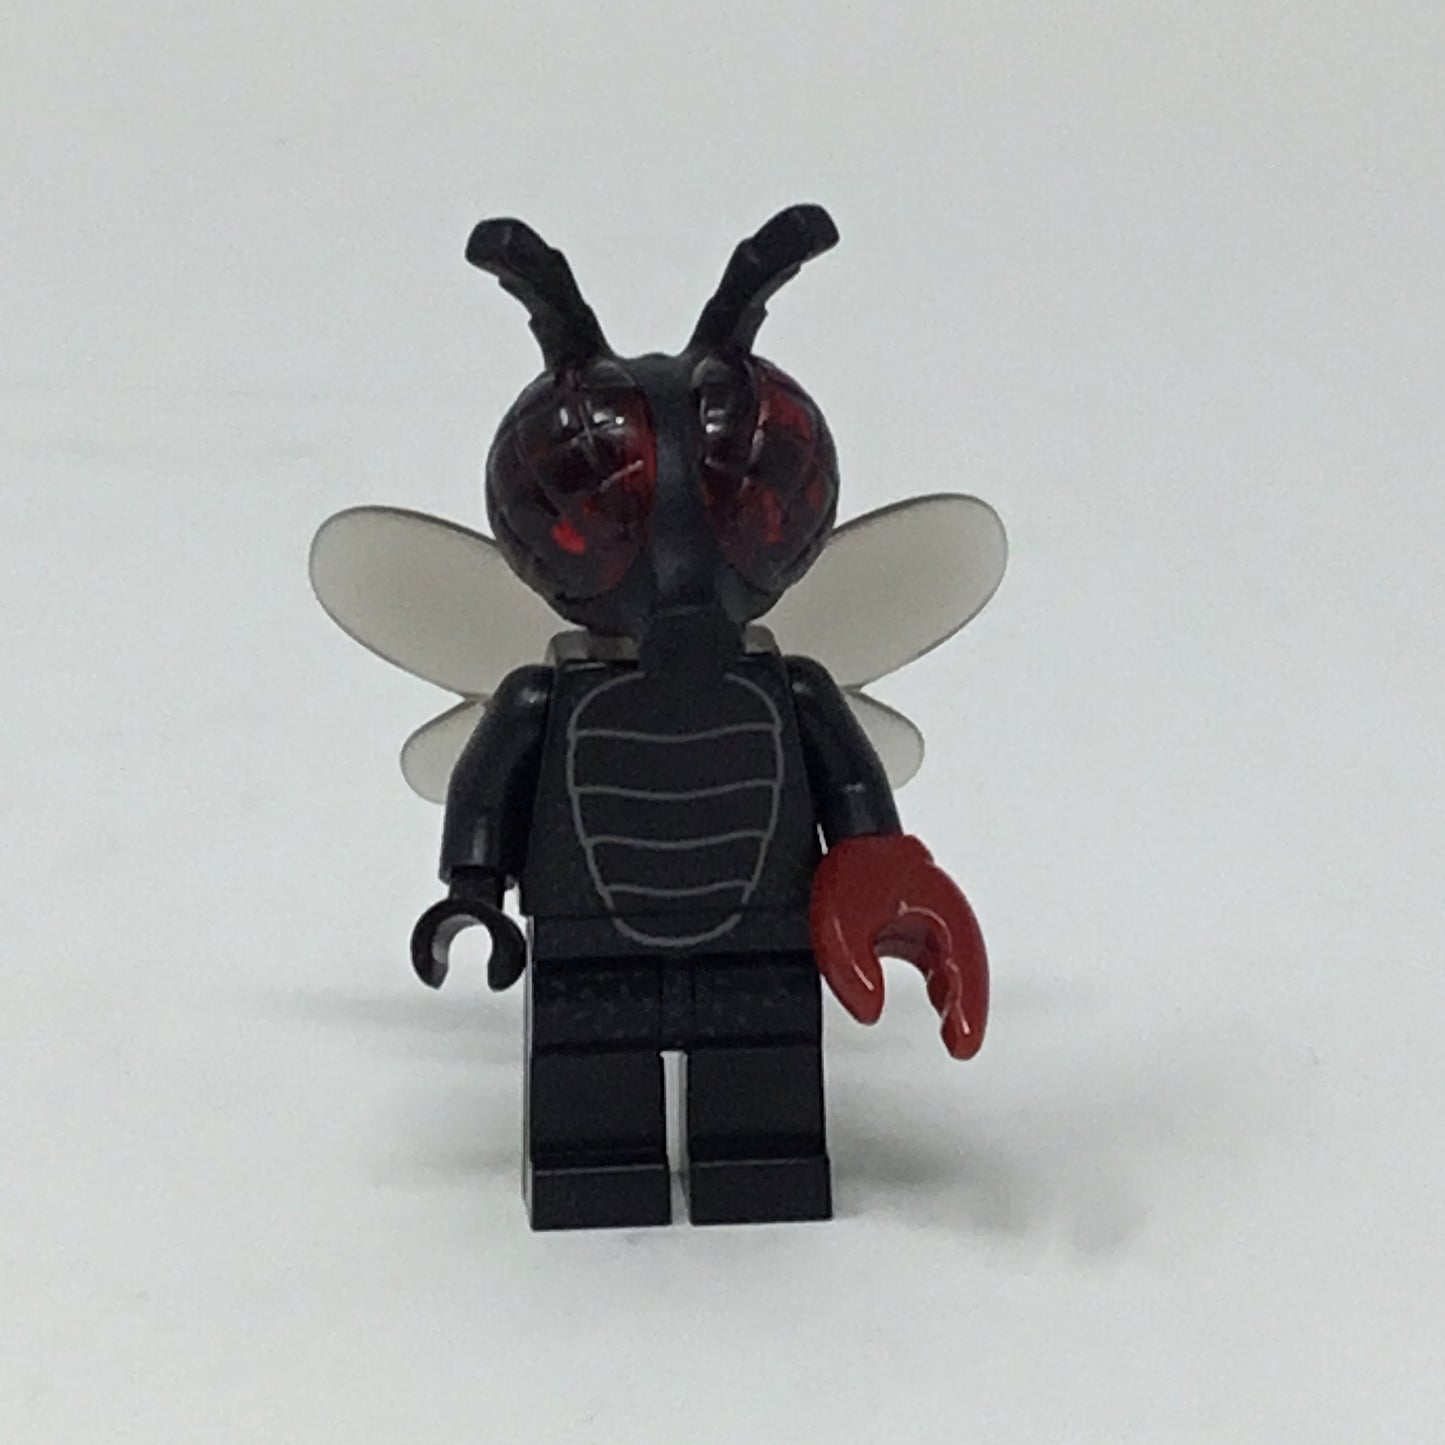 S14 Fly Monster - Series 14 Minifigure (col216)